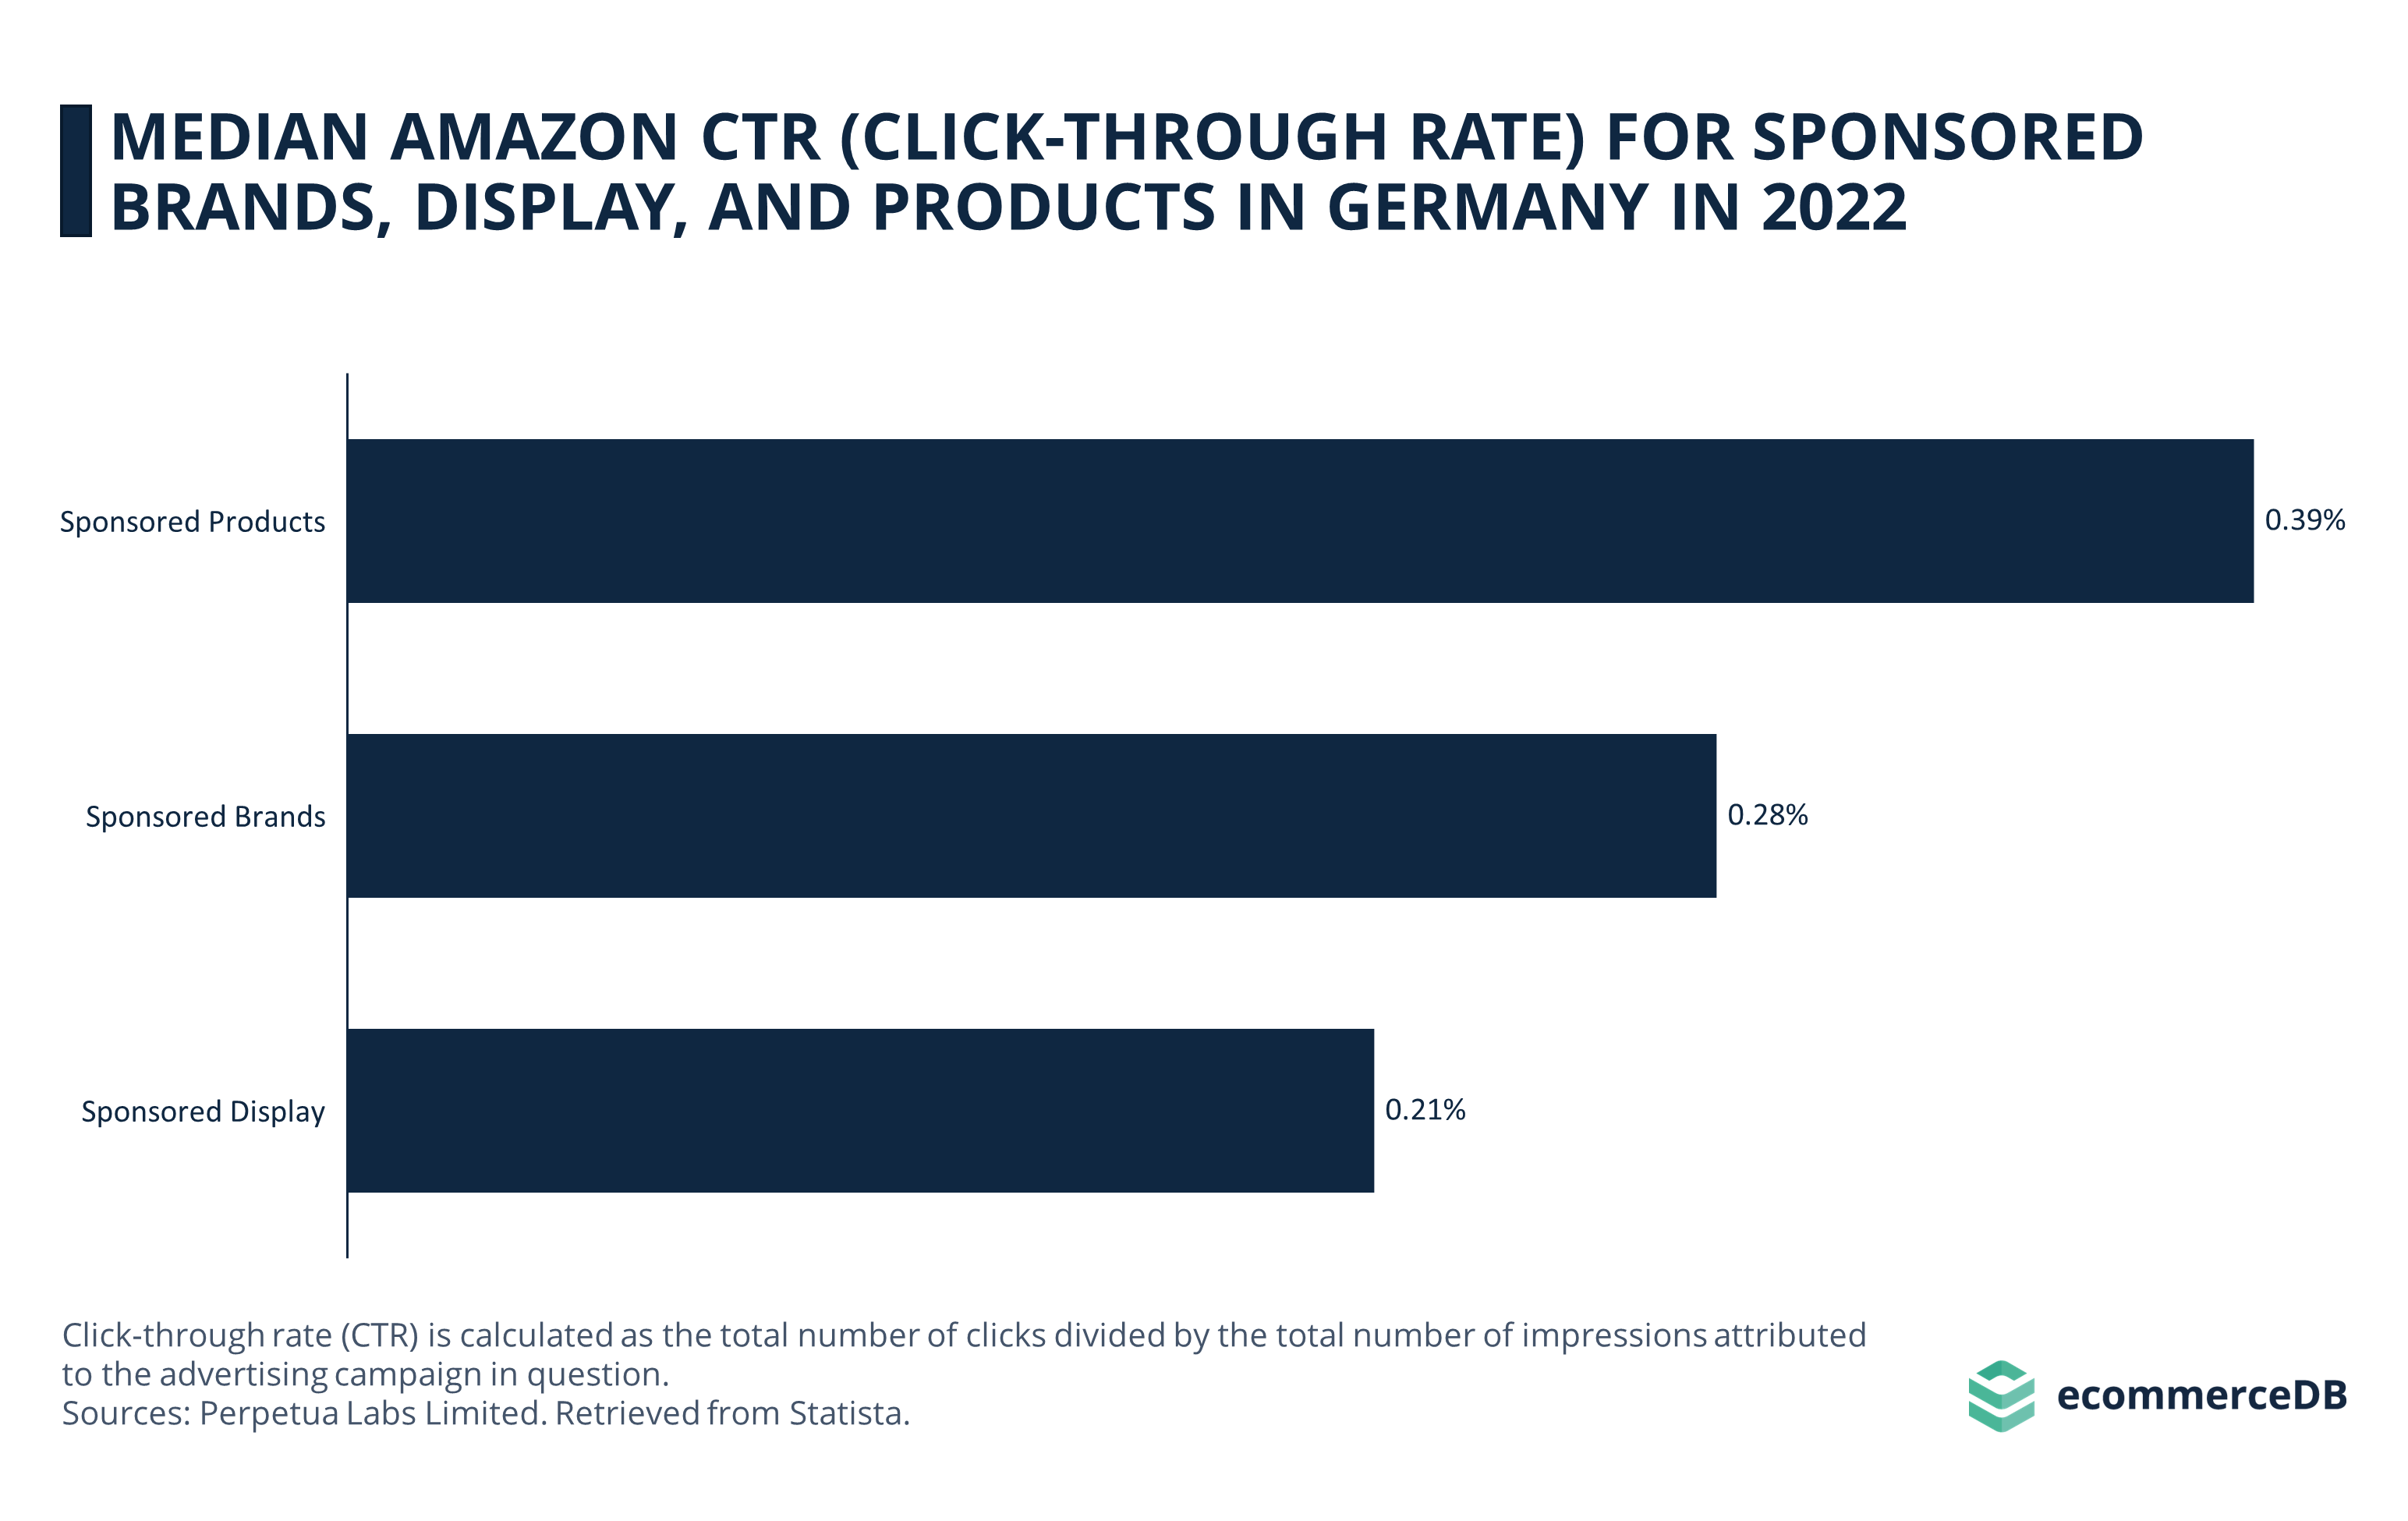 Median Amazon CTR for 3 Ad Types in Germany